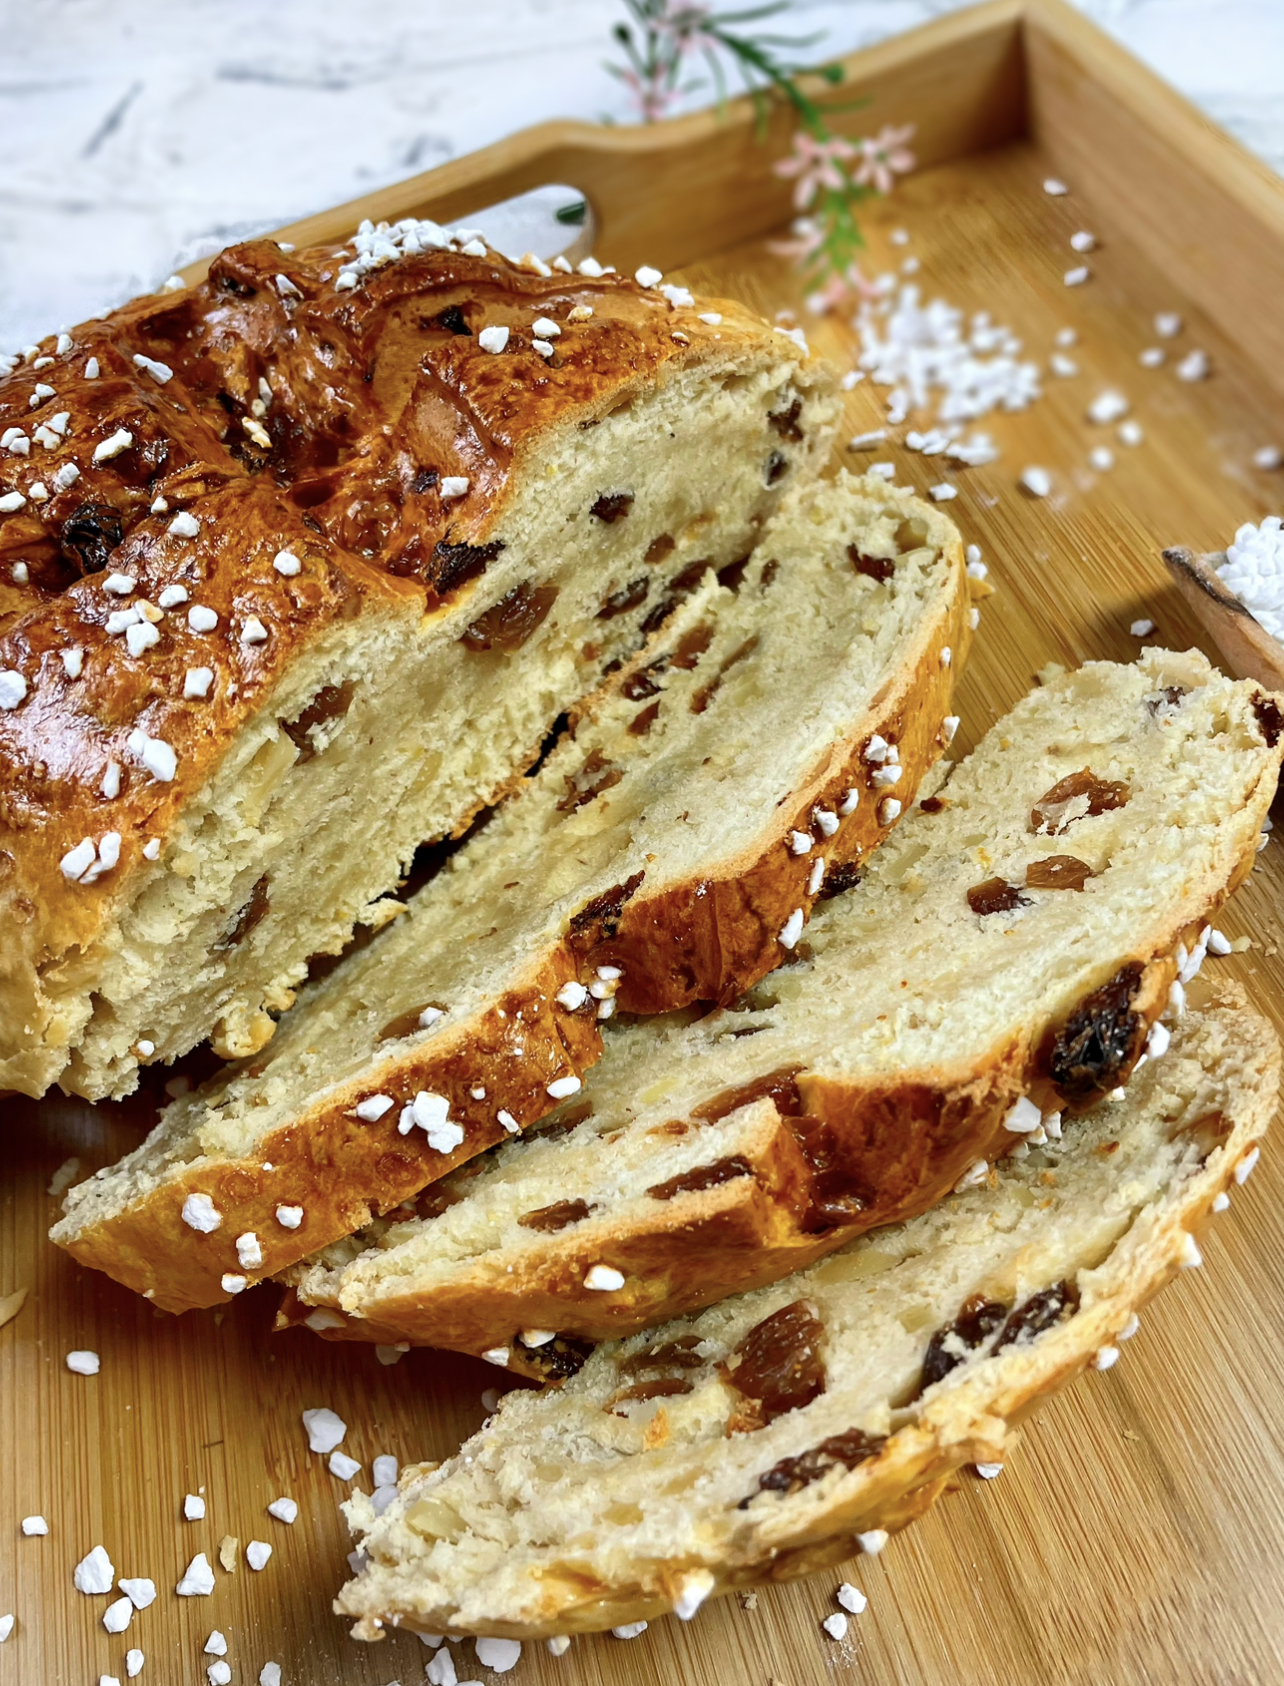 Osterbrot